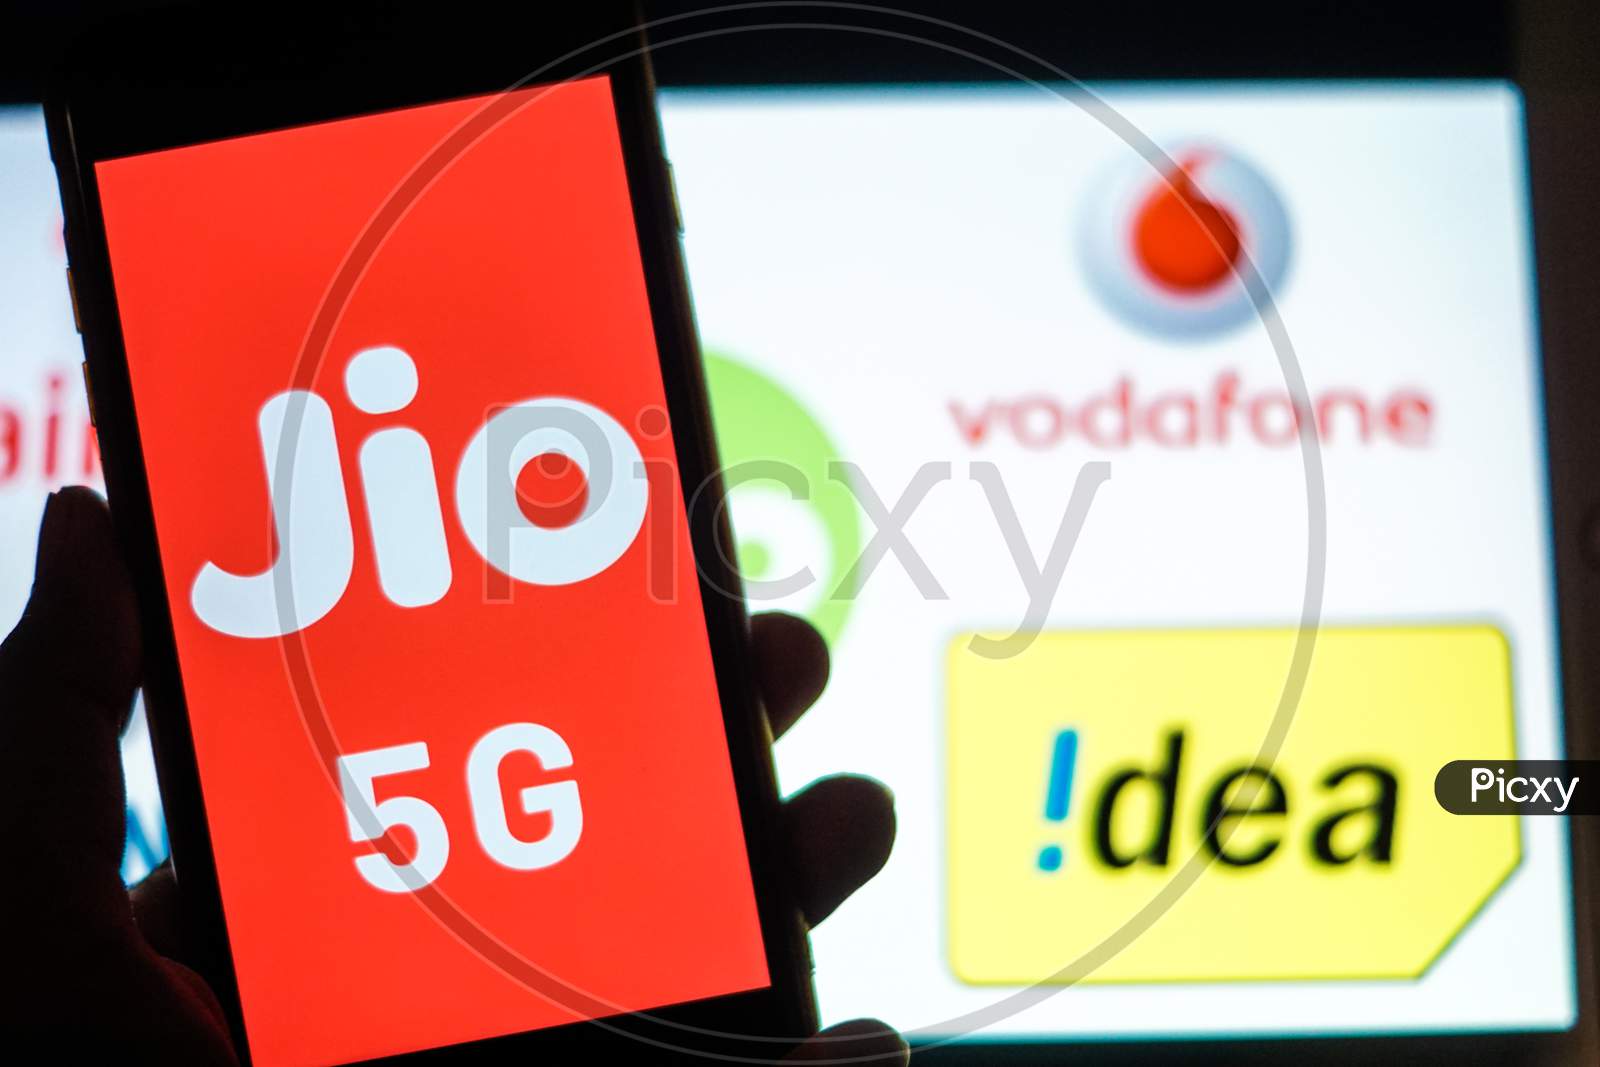 Close Up shot of a Mobilephone or Smartphone with Jio 5G on Screen and idea and Vodafone Logo in the Background - A Concept of Jio 5G vs Idea 4G and Vodafone 4G